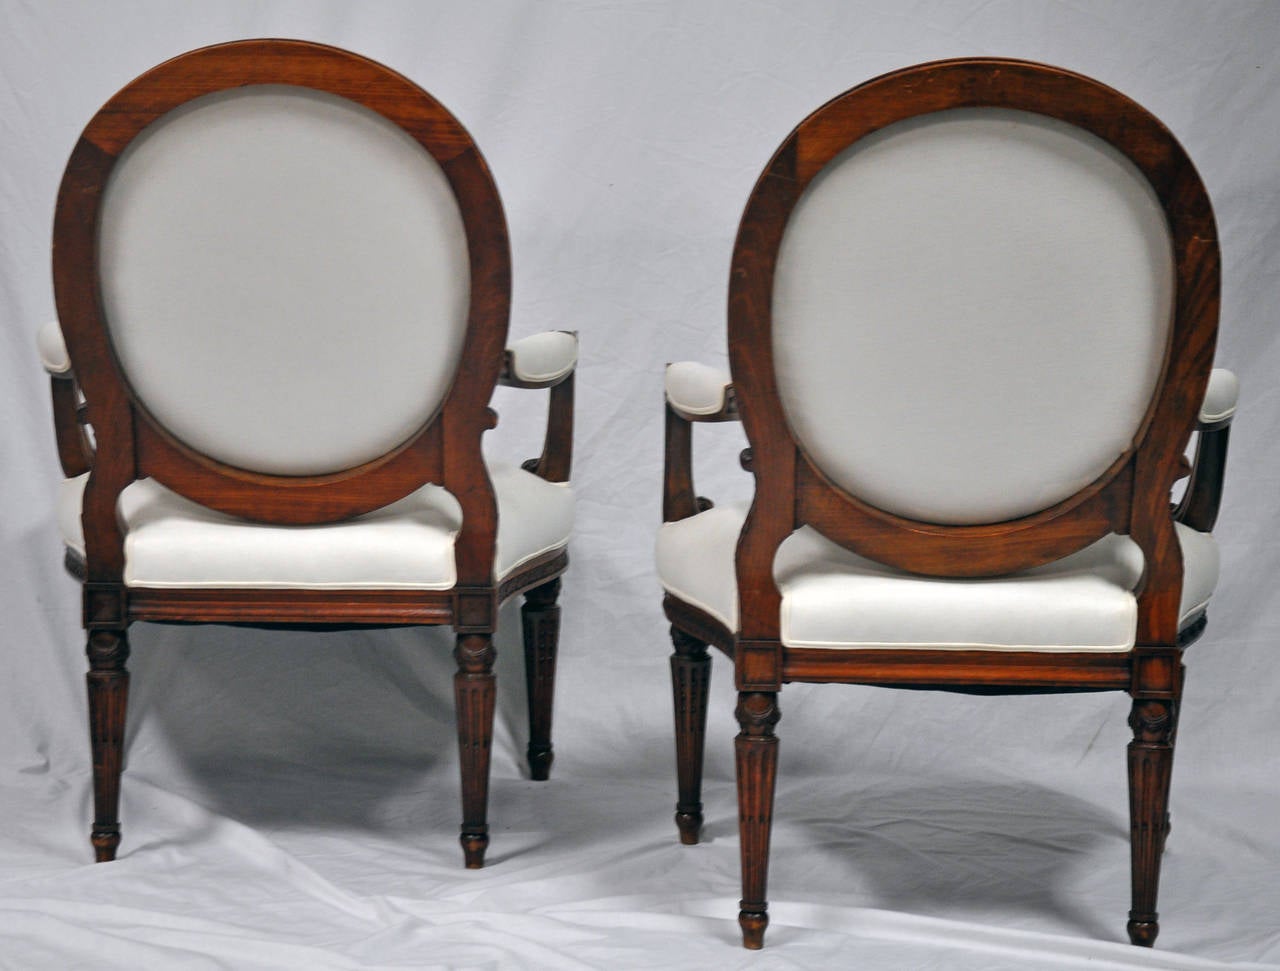 Carved Pair of 19th Century French Louis XVI Style Fauteuil in Walnut